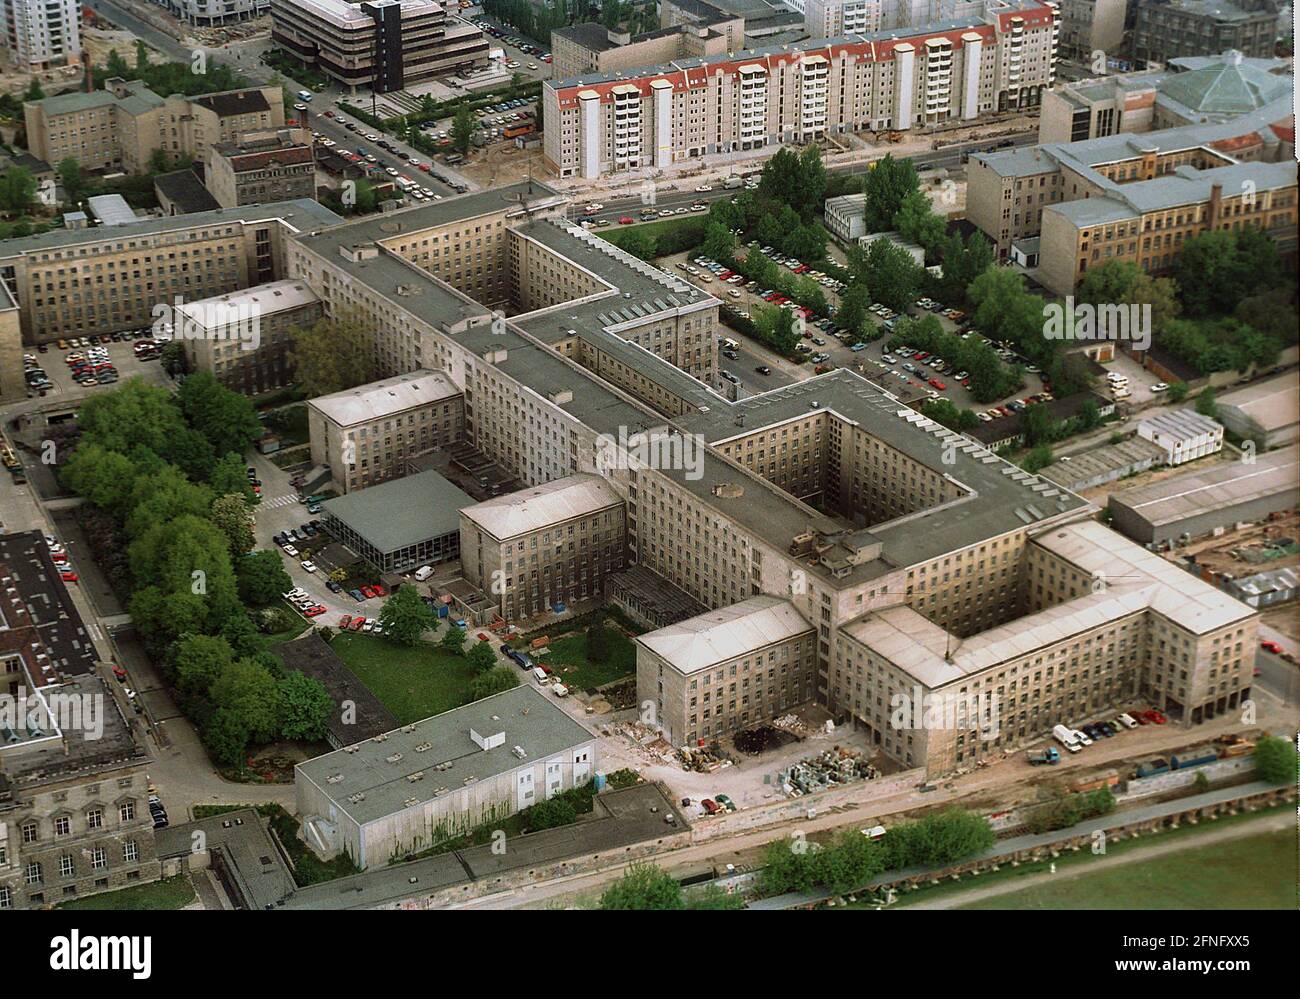 Berlin / Center / Federal Government / 1991 The trust company at Wilhelmstrasse, built as Reichs-Luftfahrtministerium, today Federal Ministry of Finance, // Aerial views / Panorama / Districts / Mitte [automated translation] Stock Photo